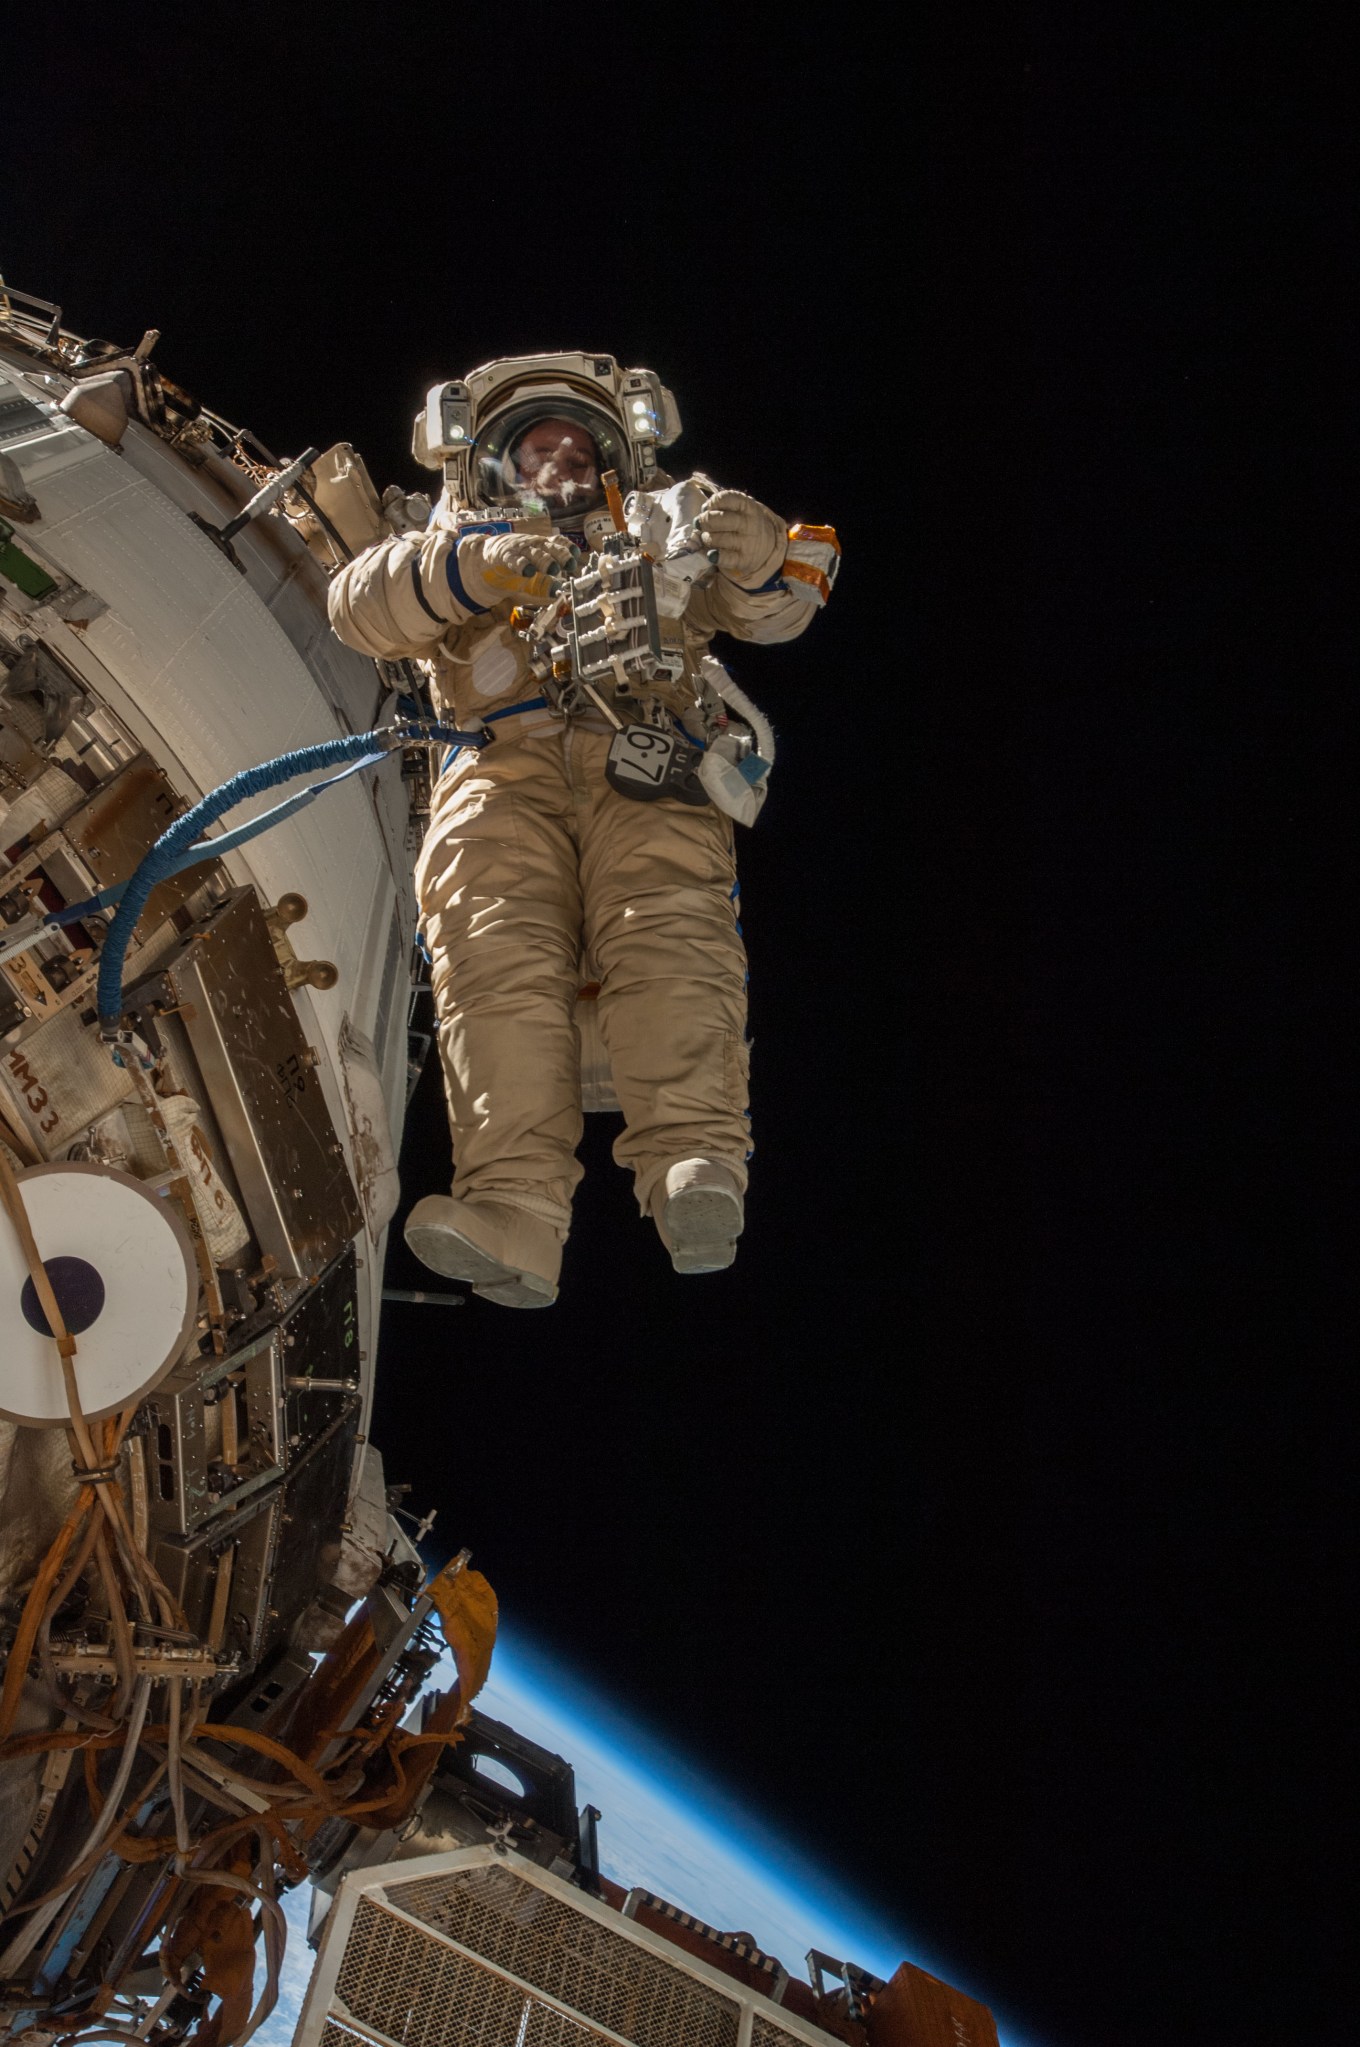 Cosmonaut Sergey Ryazanskiy conducts a spacewalk to remove and replace hardware on the International Space Station.